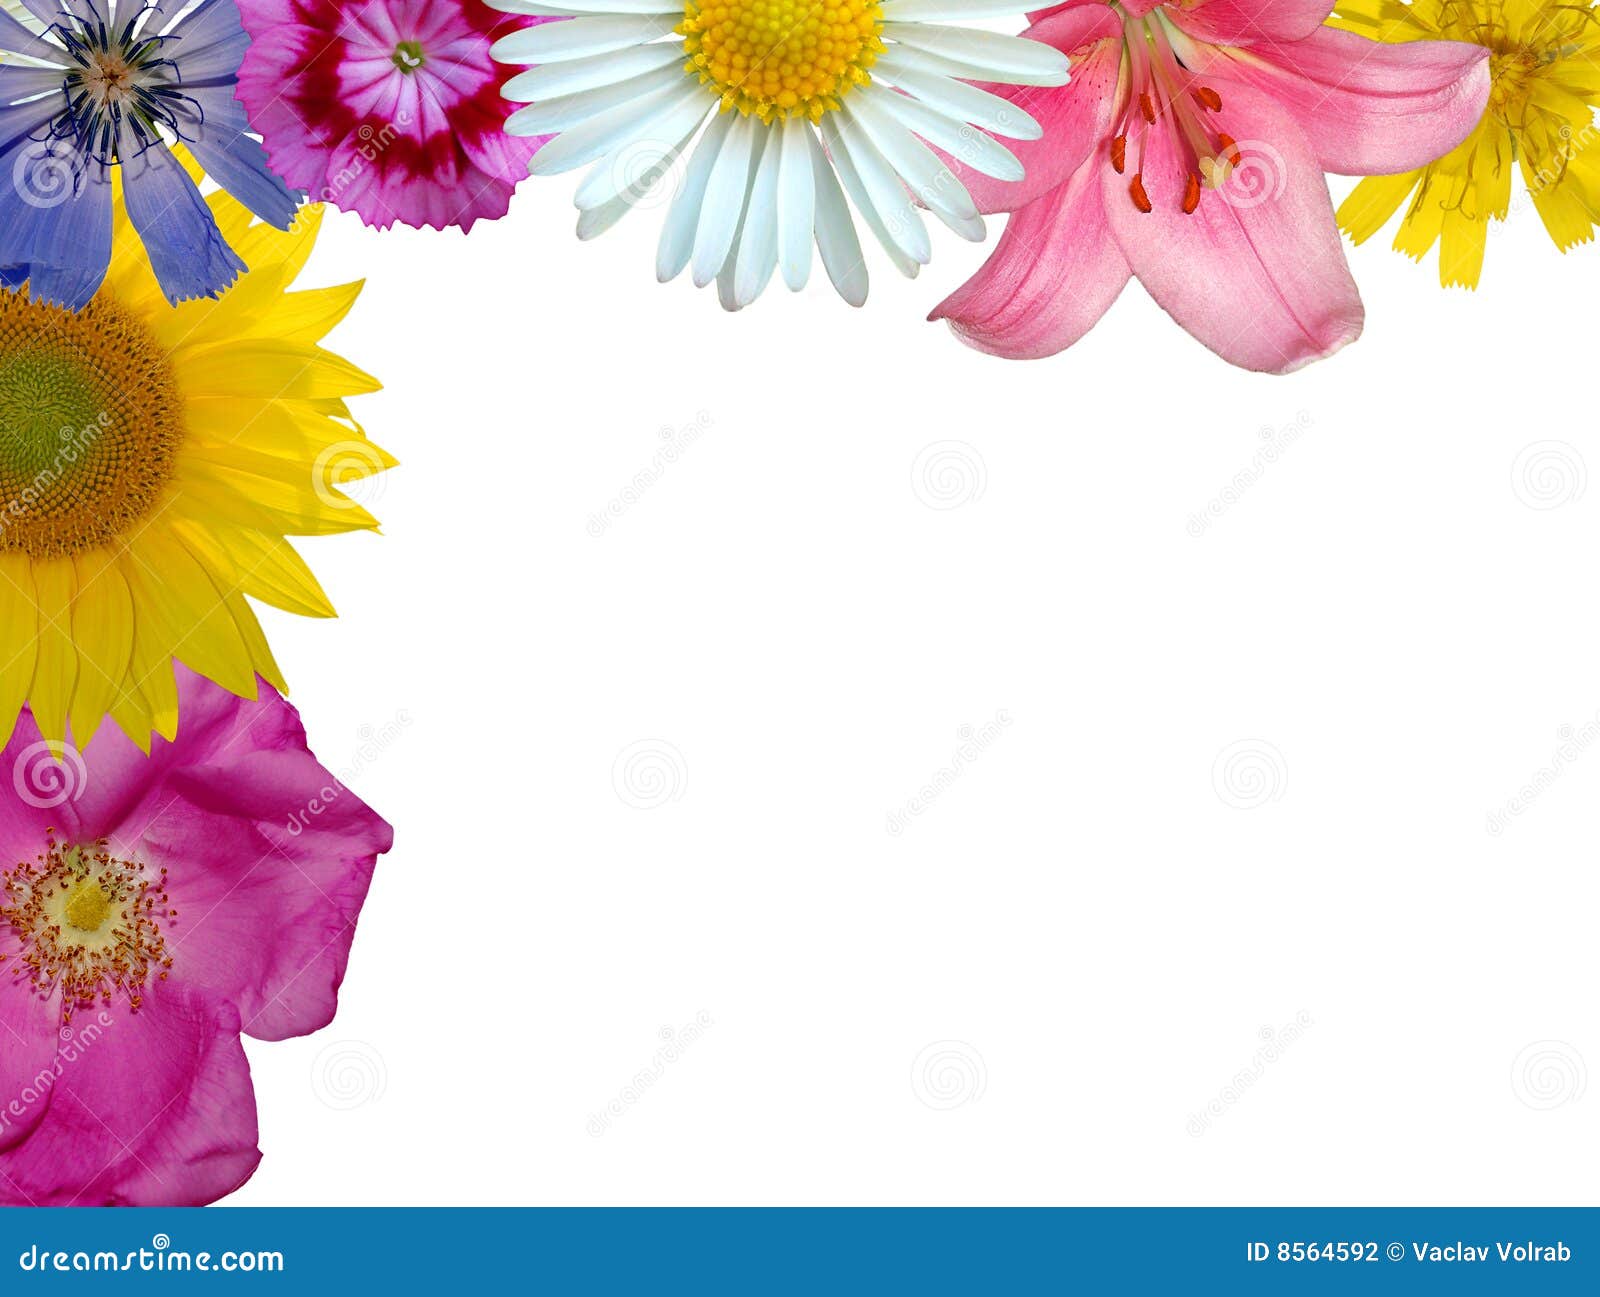 Floral background stock photo. Image of border, daisy - 8564592